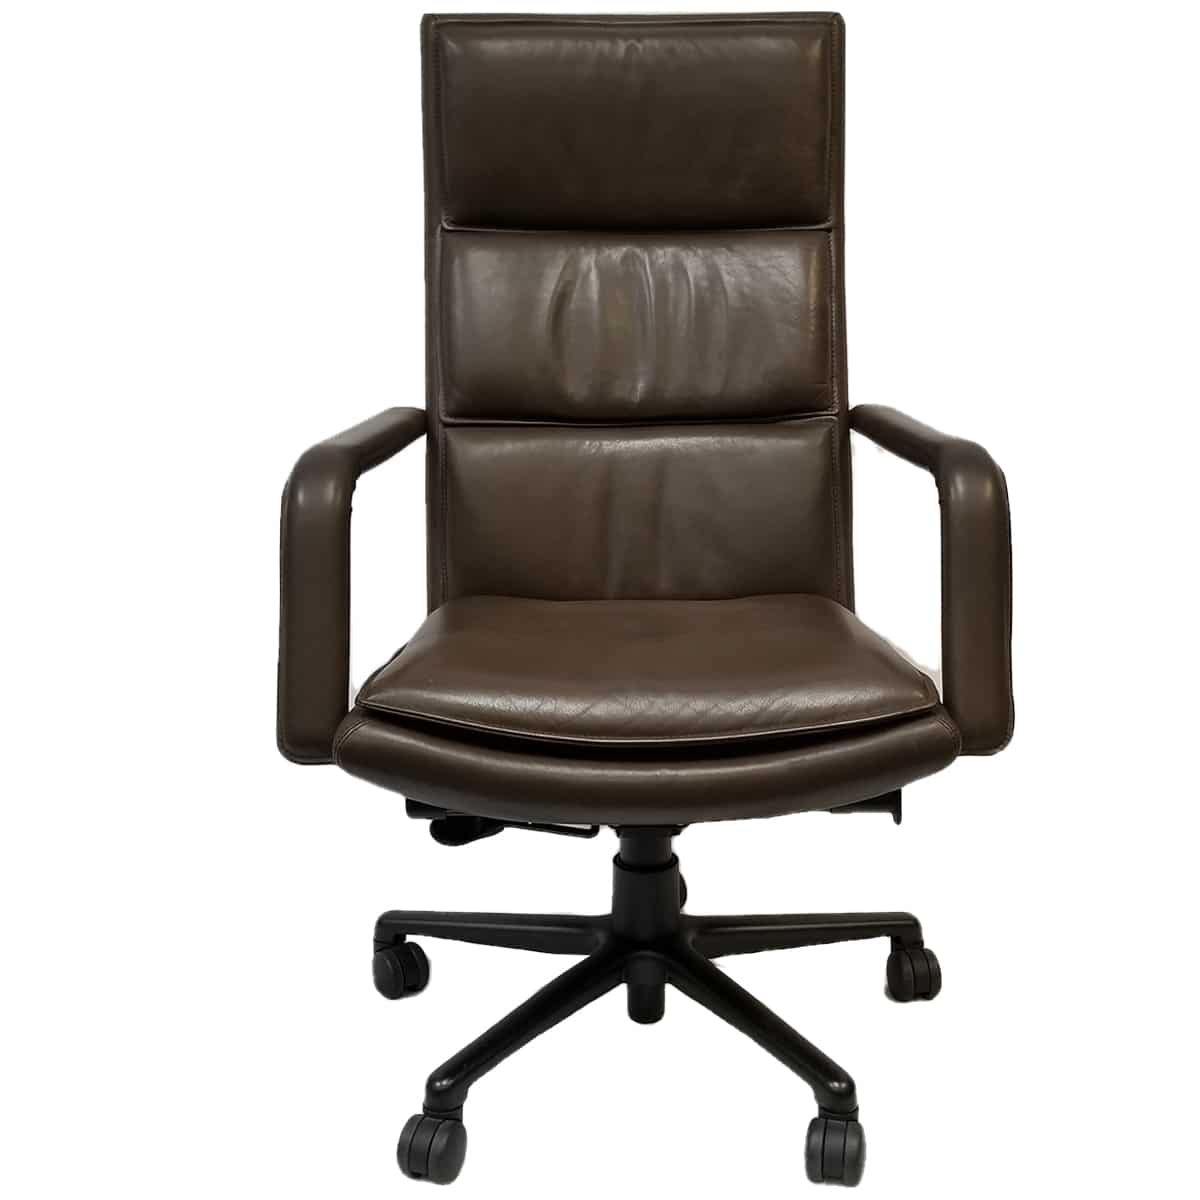 Back Brown Leather Conference Chair, Brown Leather Conference Chair